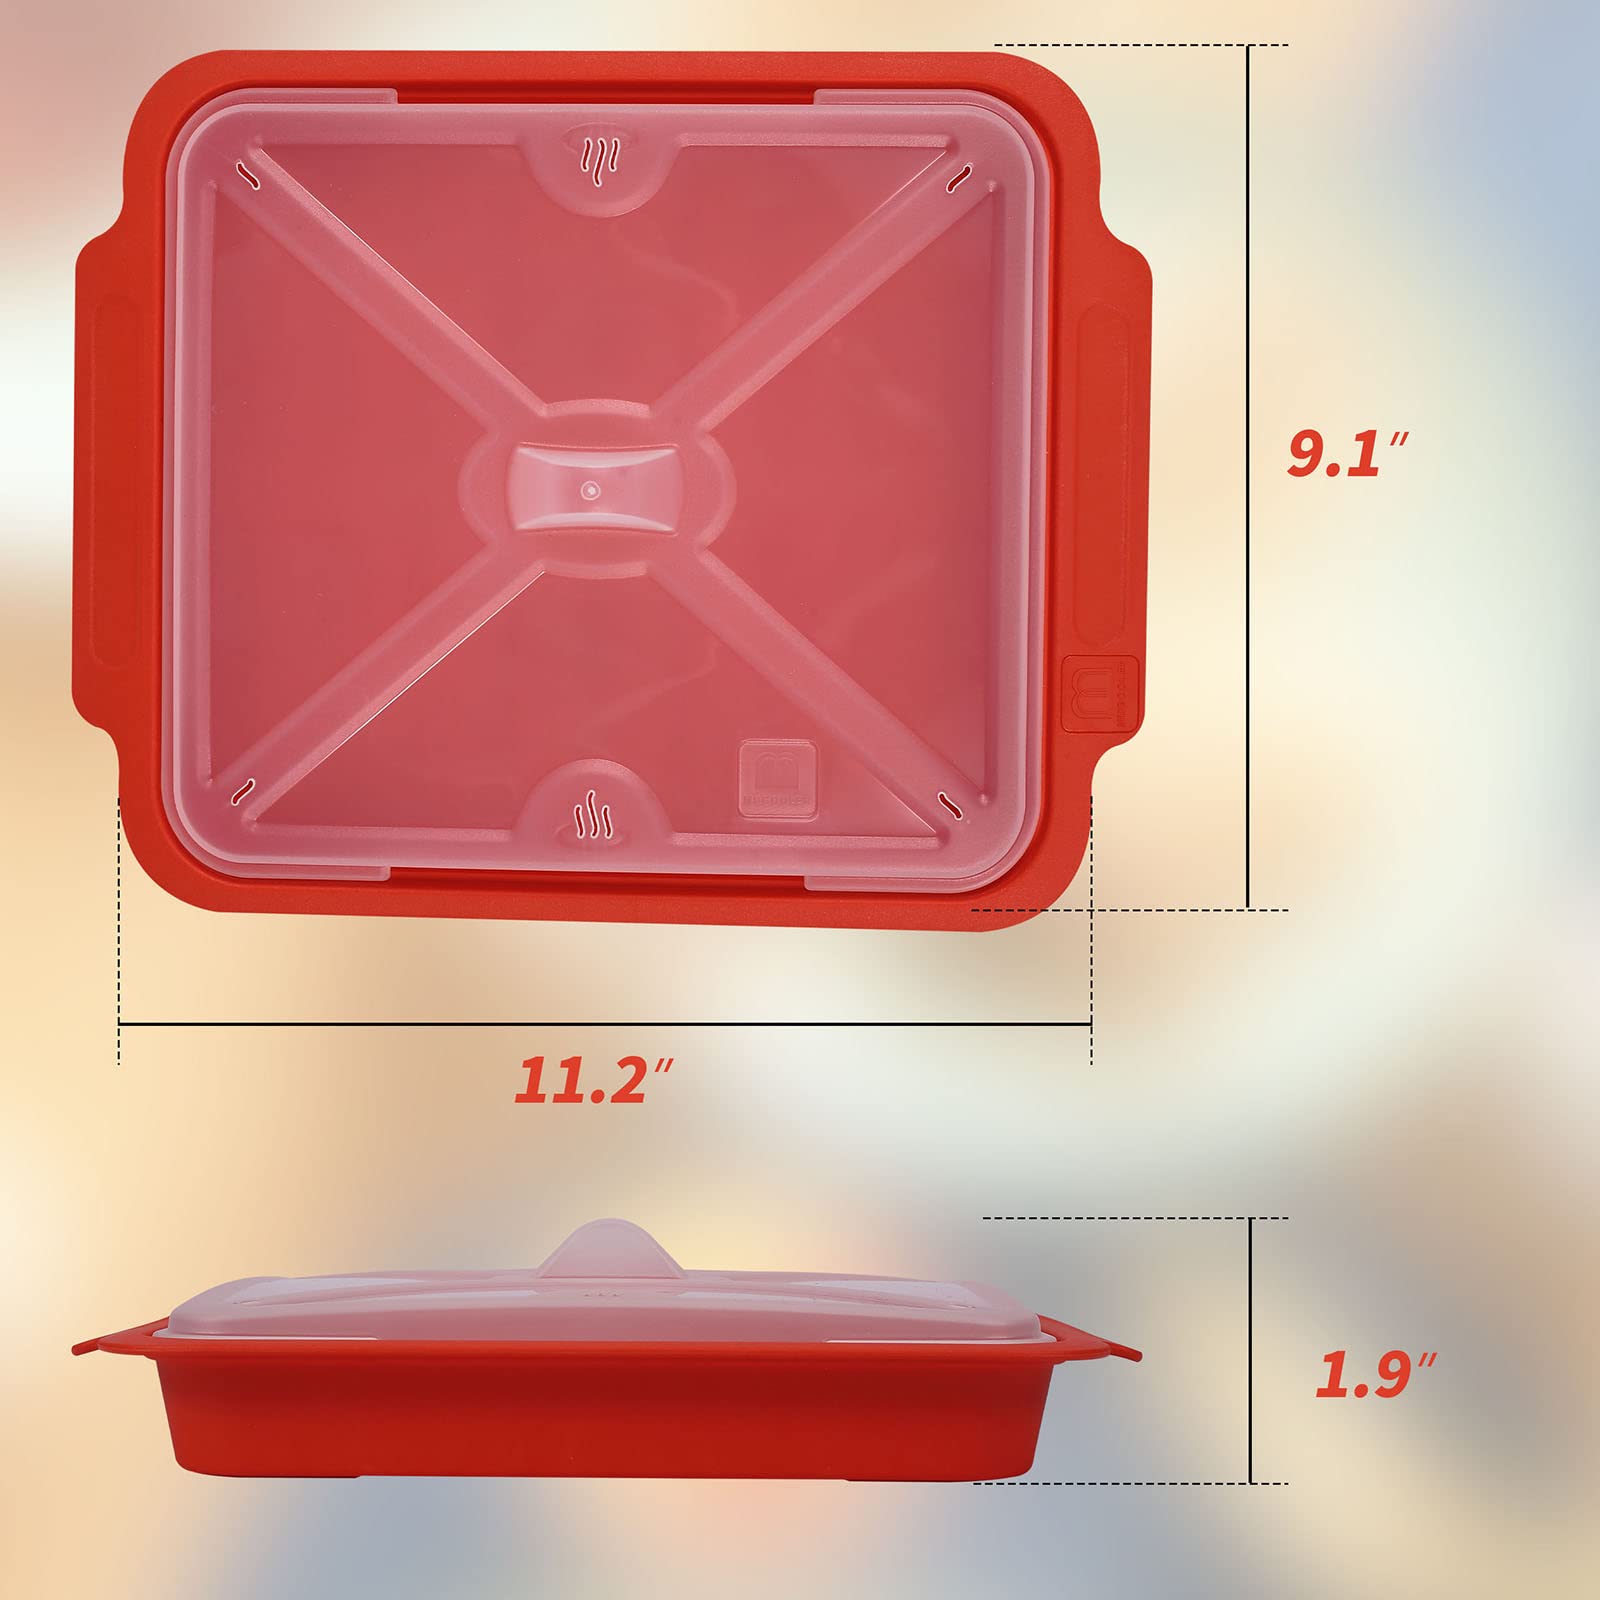 MMUGOOLER Microwave Easy Bacon Maker/Cooker with Lid, Safety, Quick and with No Mess, 11.3“ L x 9.0" W x 2.4" H- Red